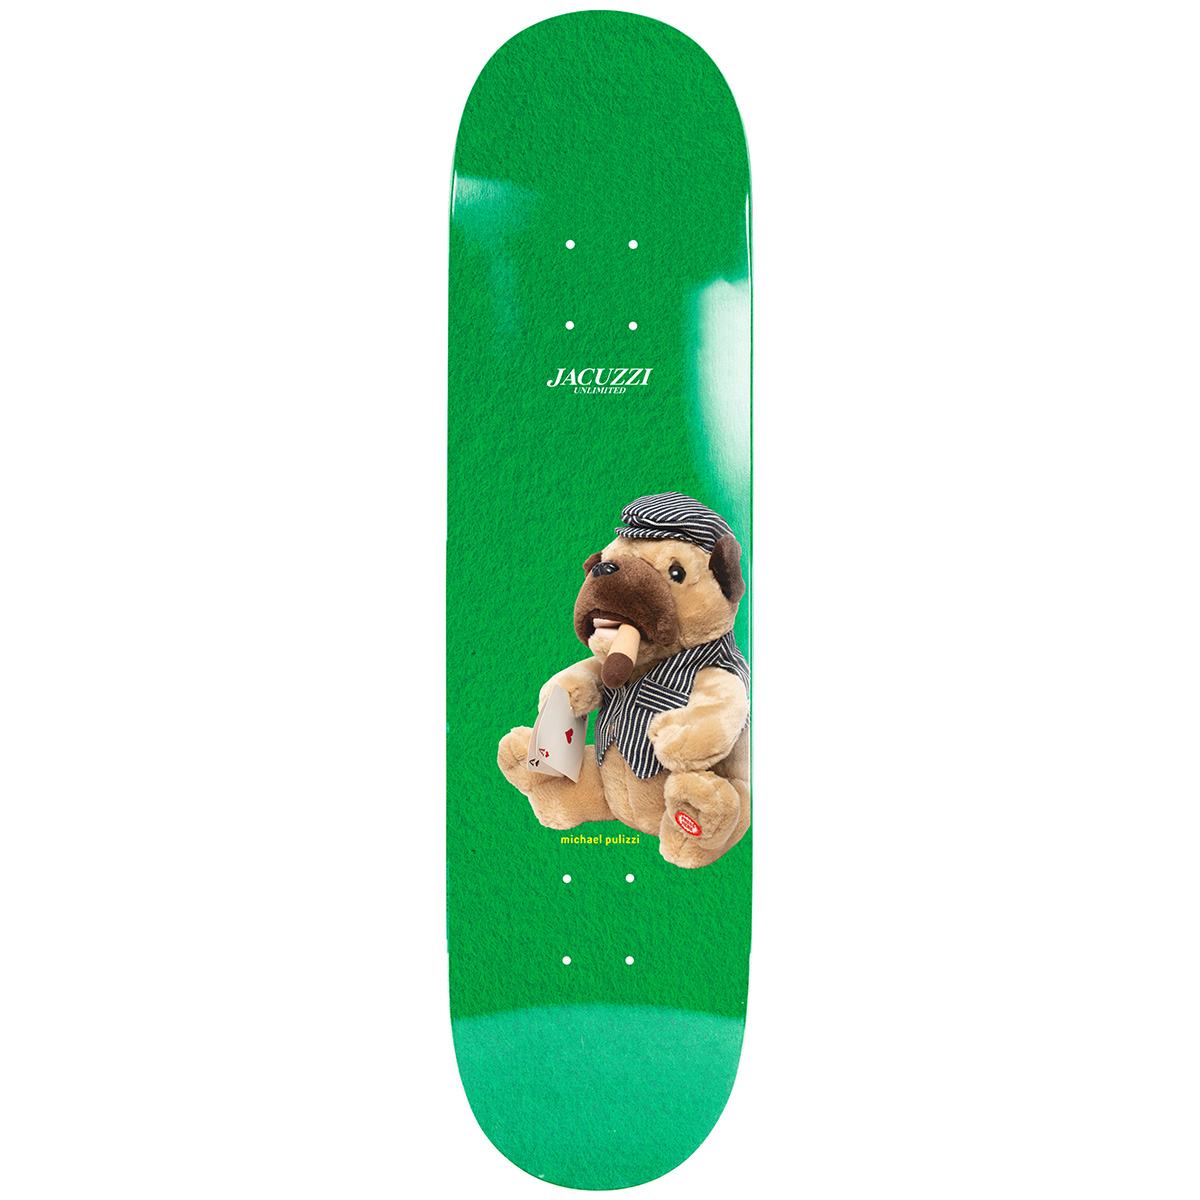 Jacuzzi Michael Pulizzi Know When to Hold Em Skateboard Deck Green 8.375